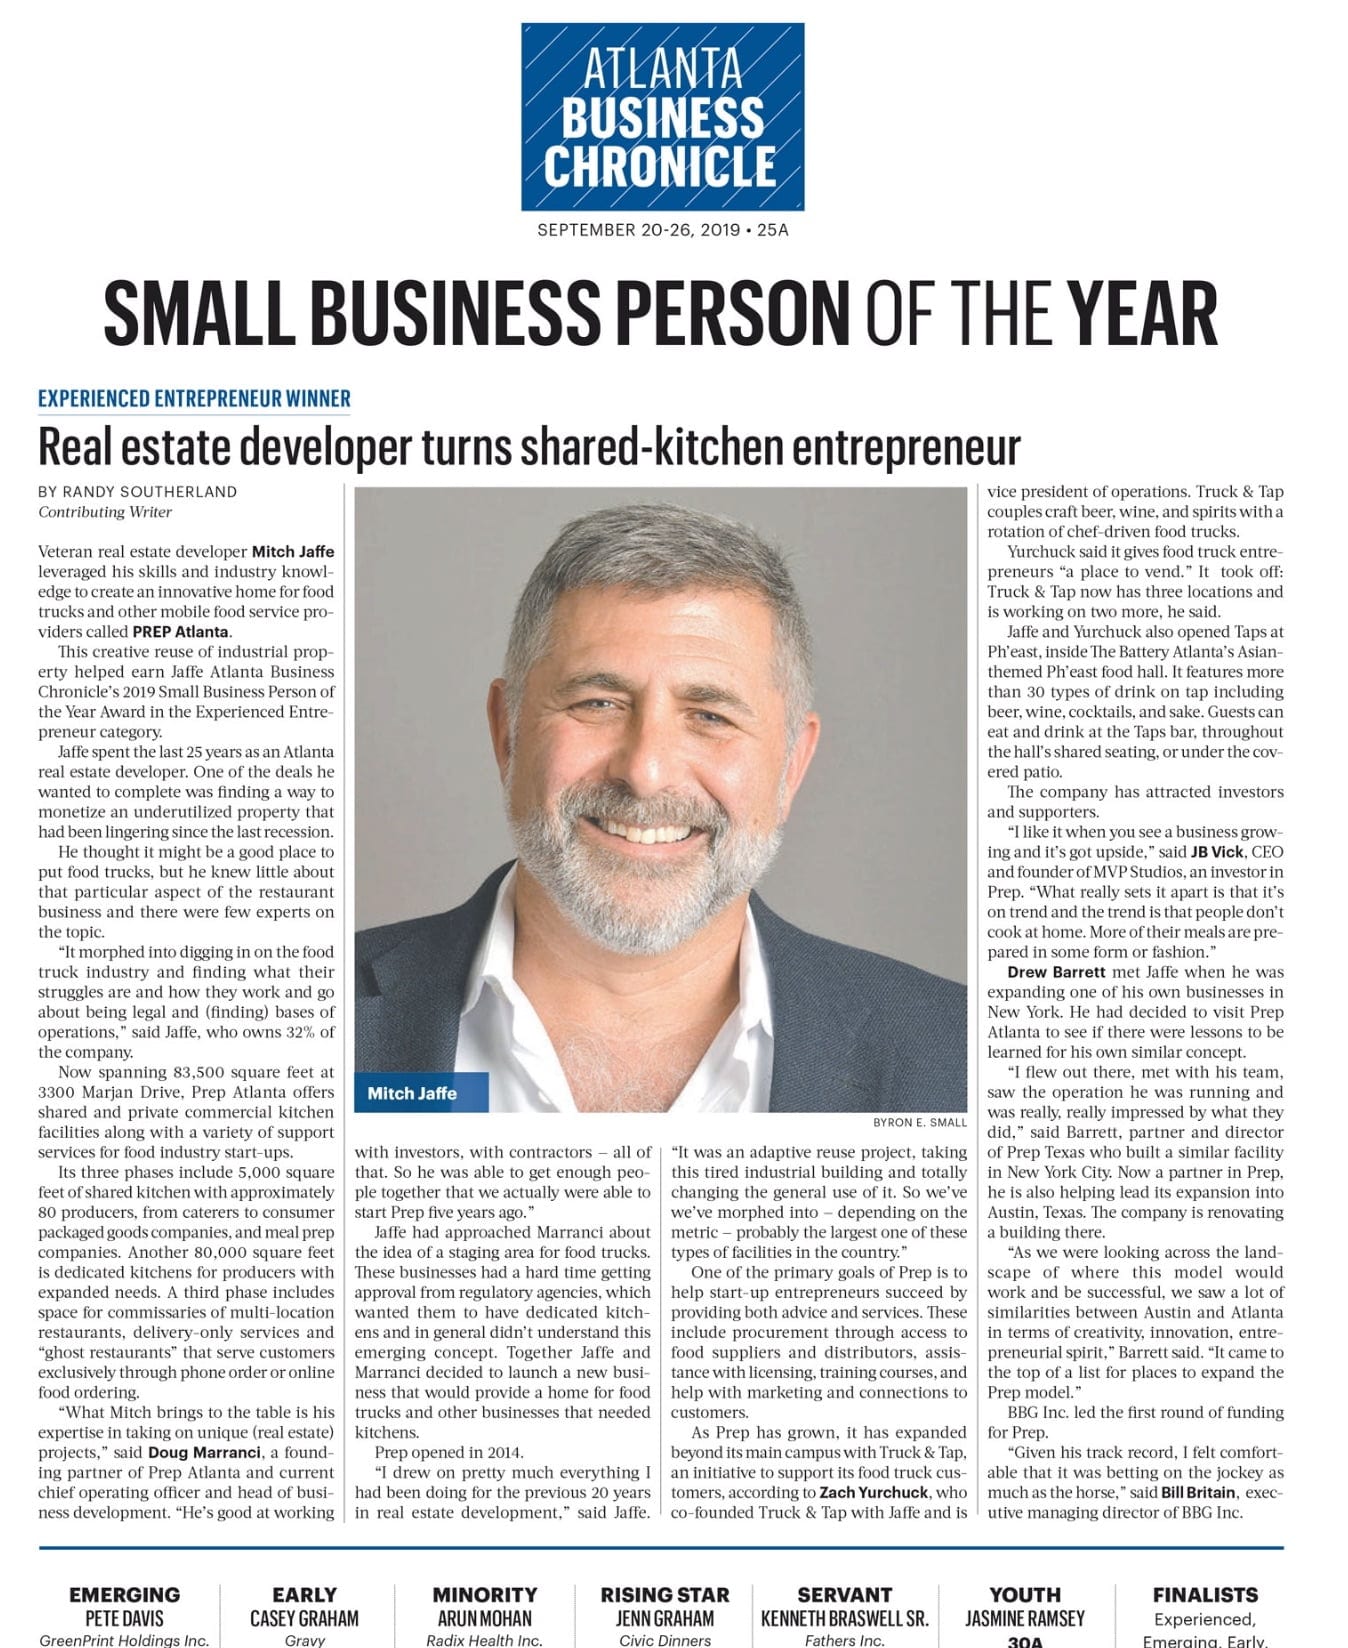 Mitch Jaffe,
Co Founder, CEO and CFO of PREP was chosen by the
Atlanta Business Chronicle as “Small Business Person of the Year”.